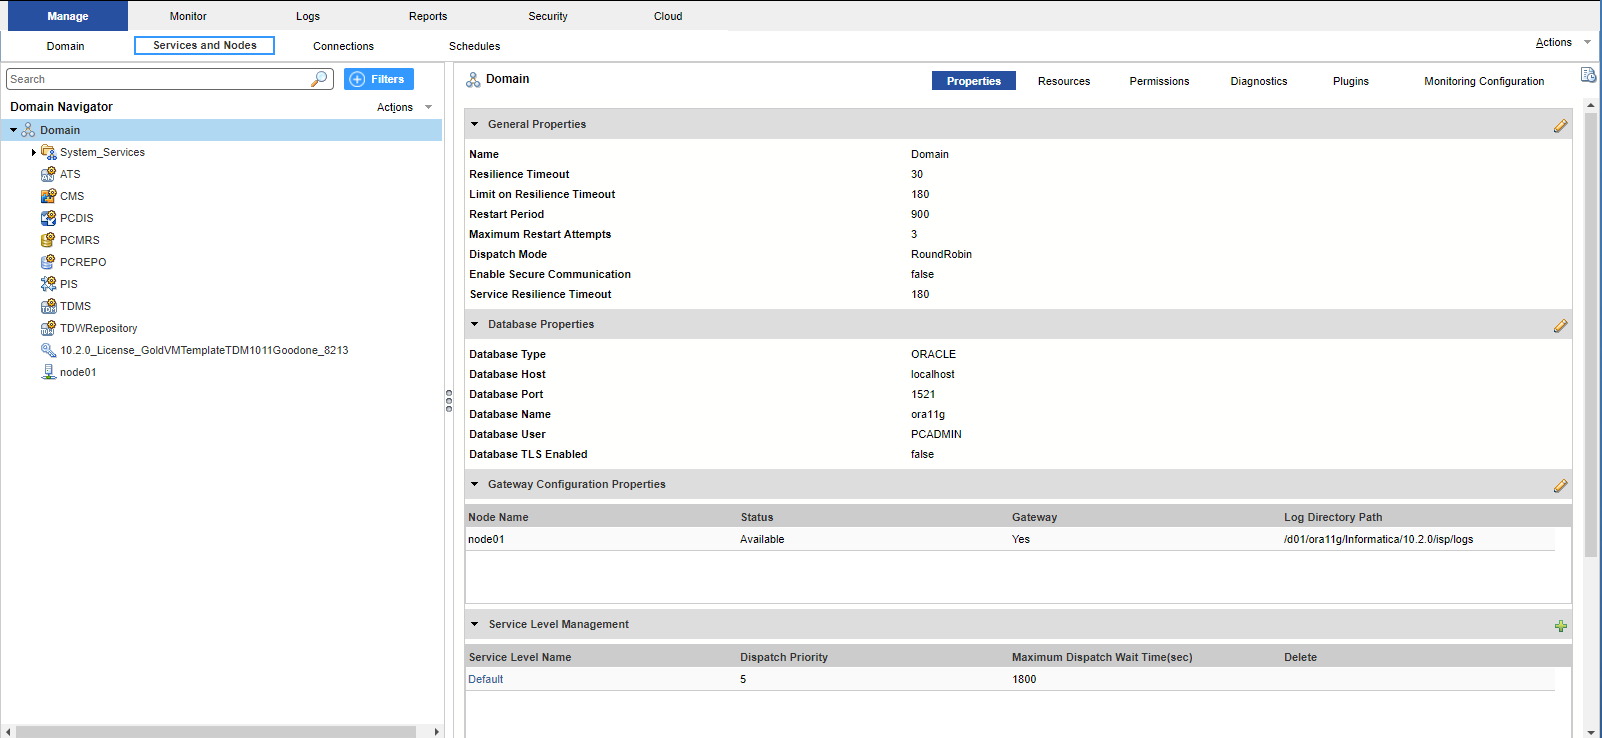 The Administrator tool displays the following views: Domain, Logs, Monitoring, Reports, Security, and Cloud. The Domain view shows Services and Nodes and Connections tabs. 
			 